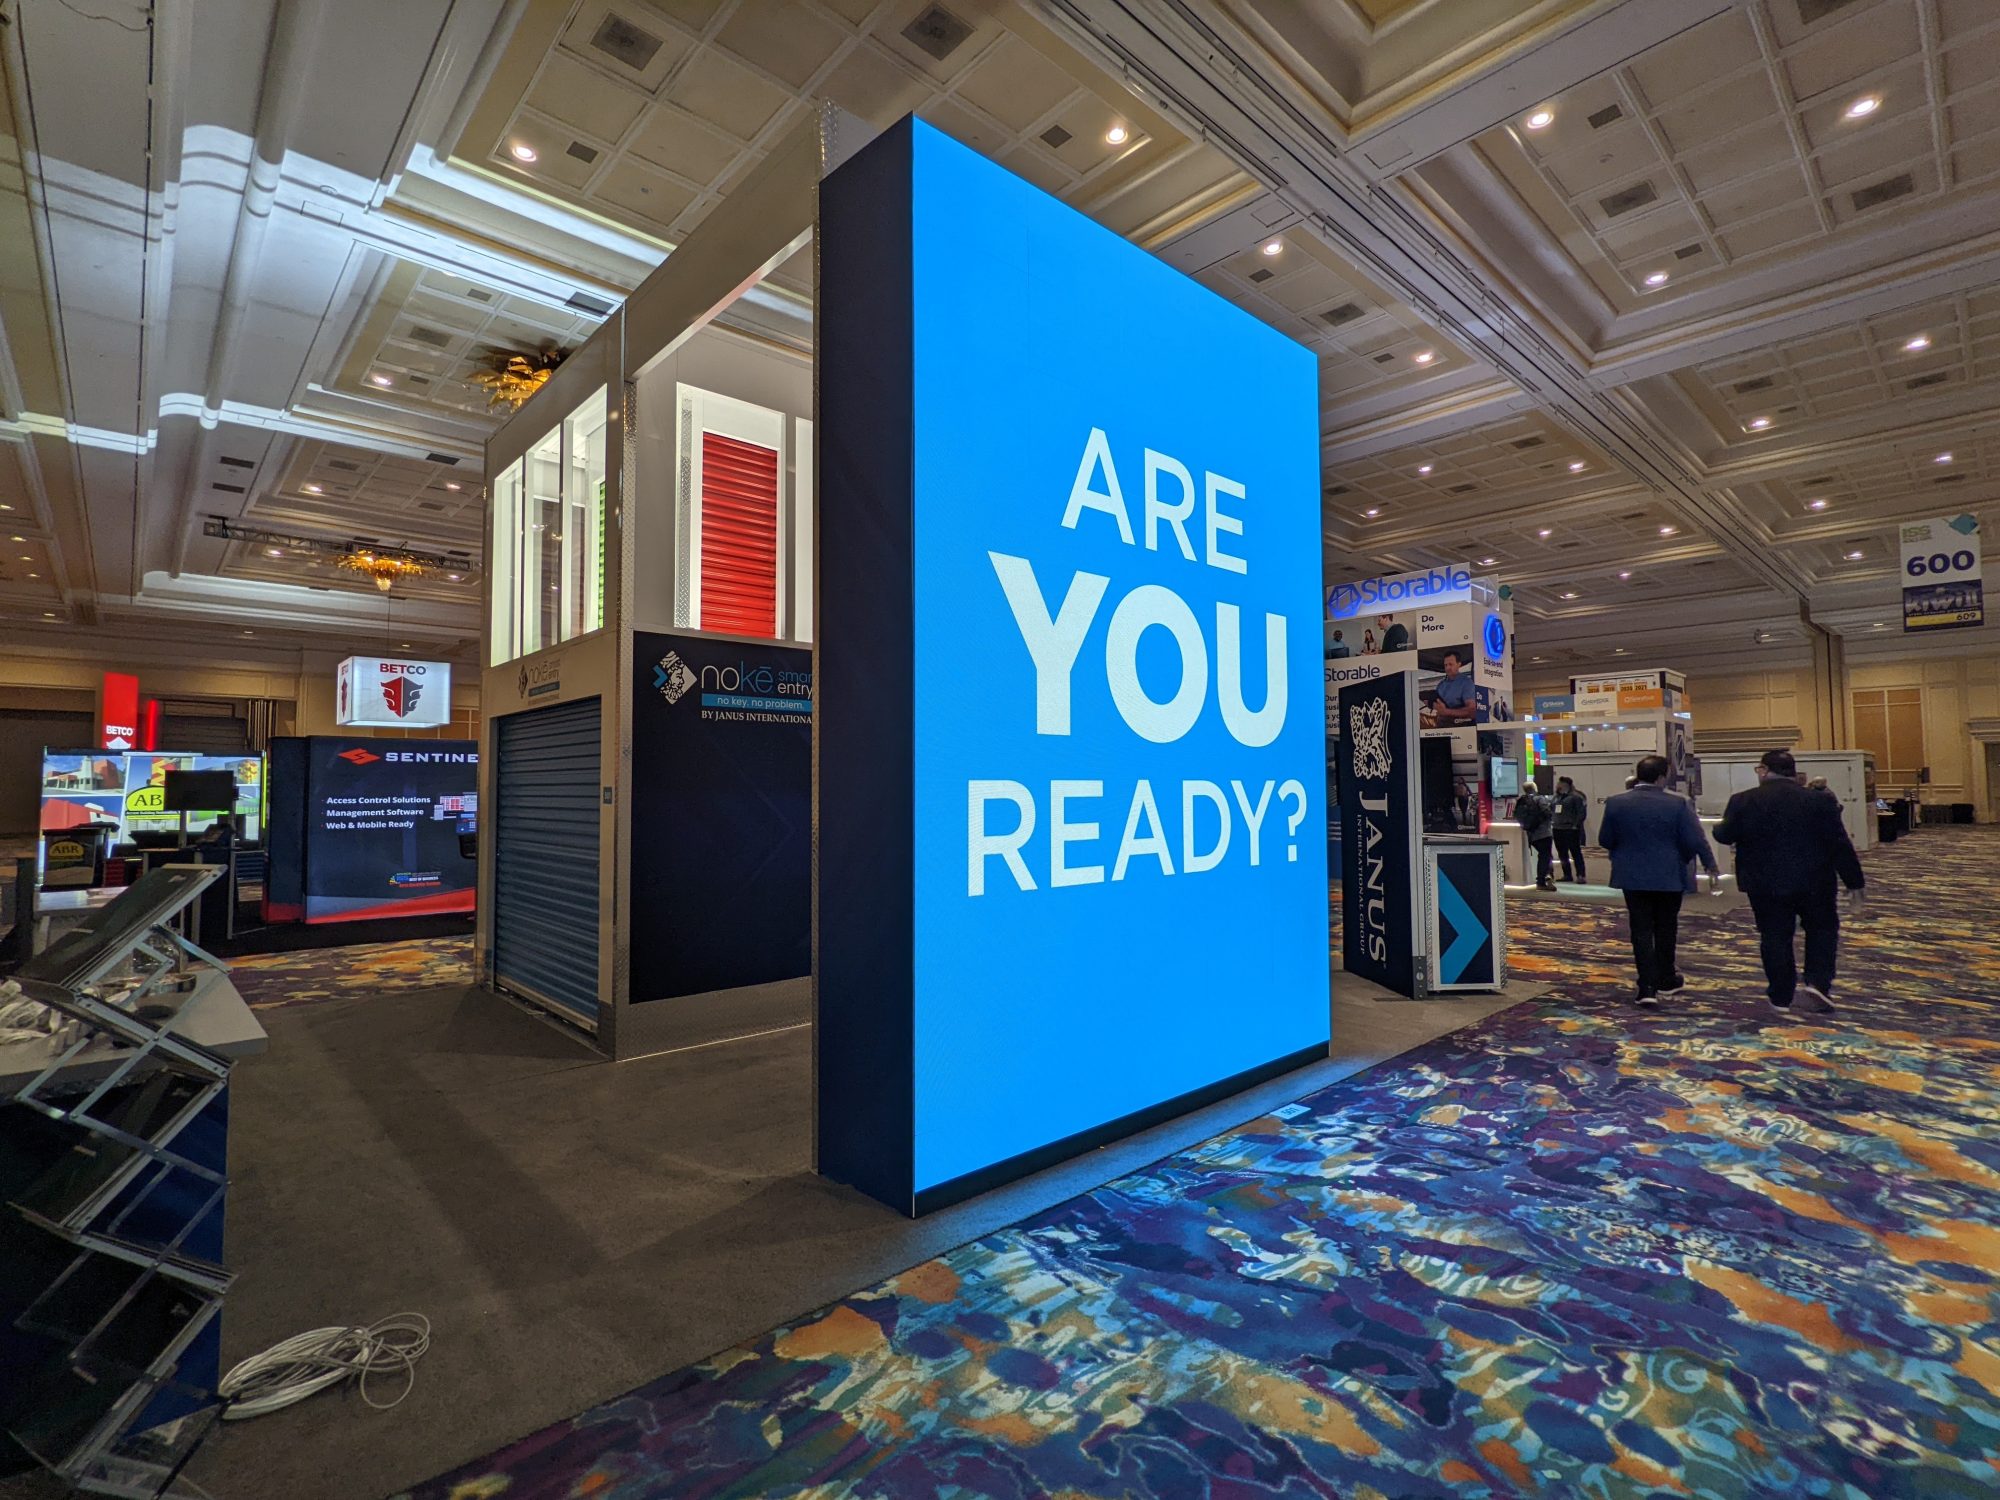 STAND OUT IN THE CROWD: EVENT BOOTH EXPOS GO DIGITAL